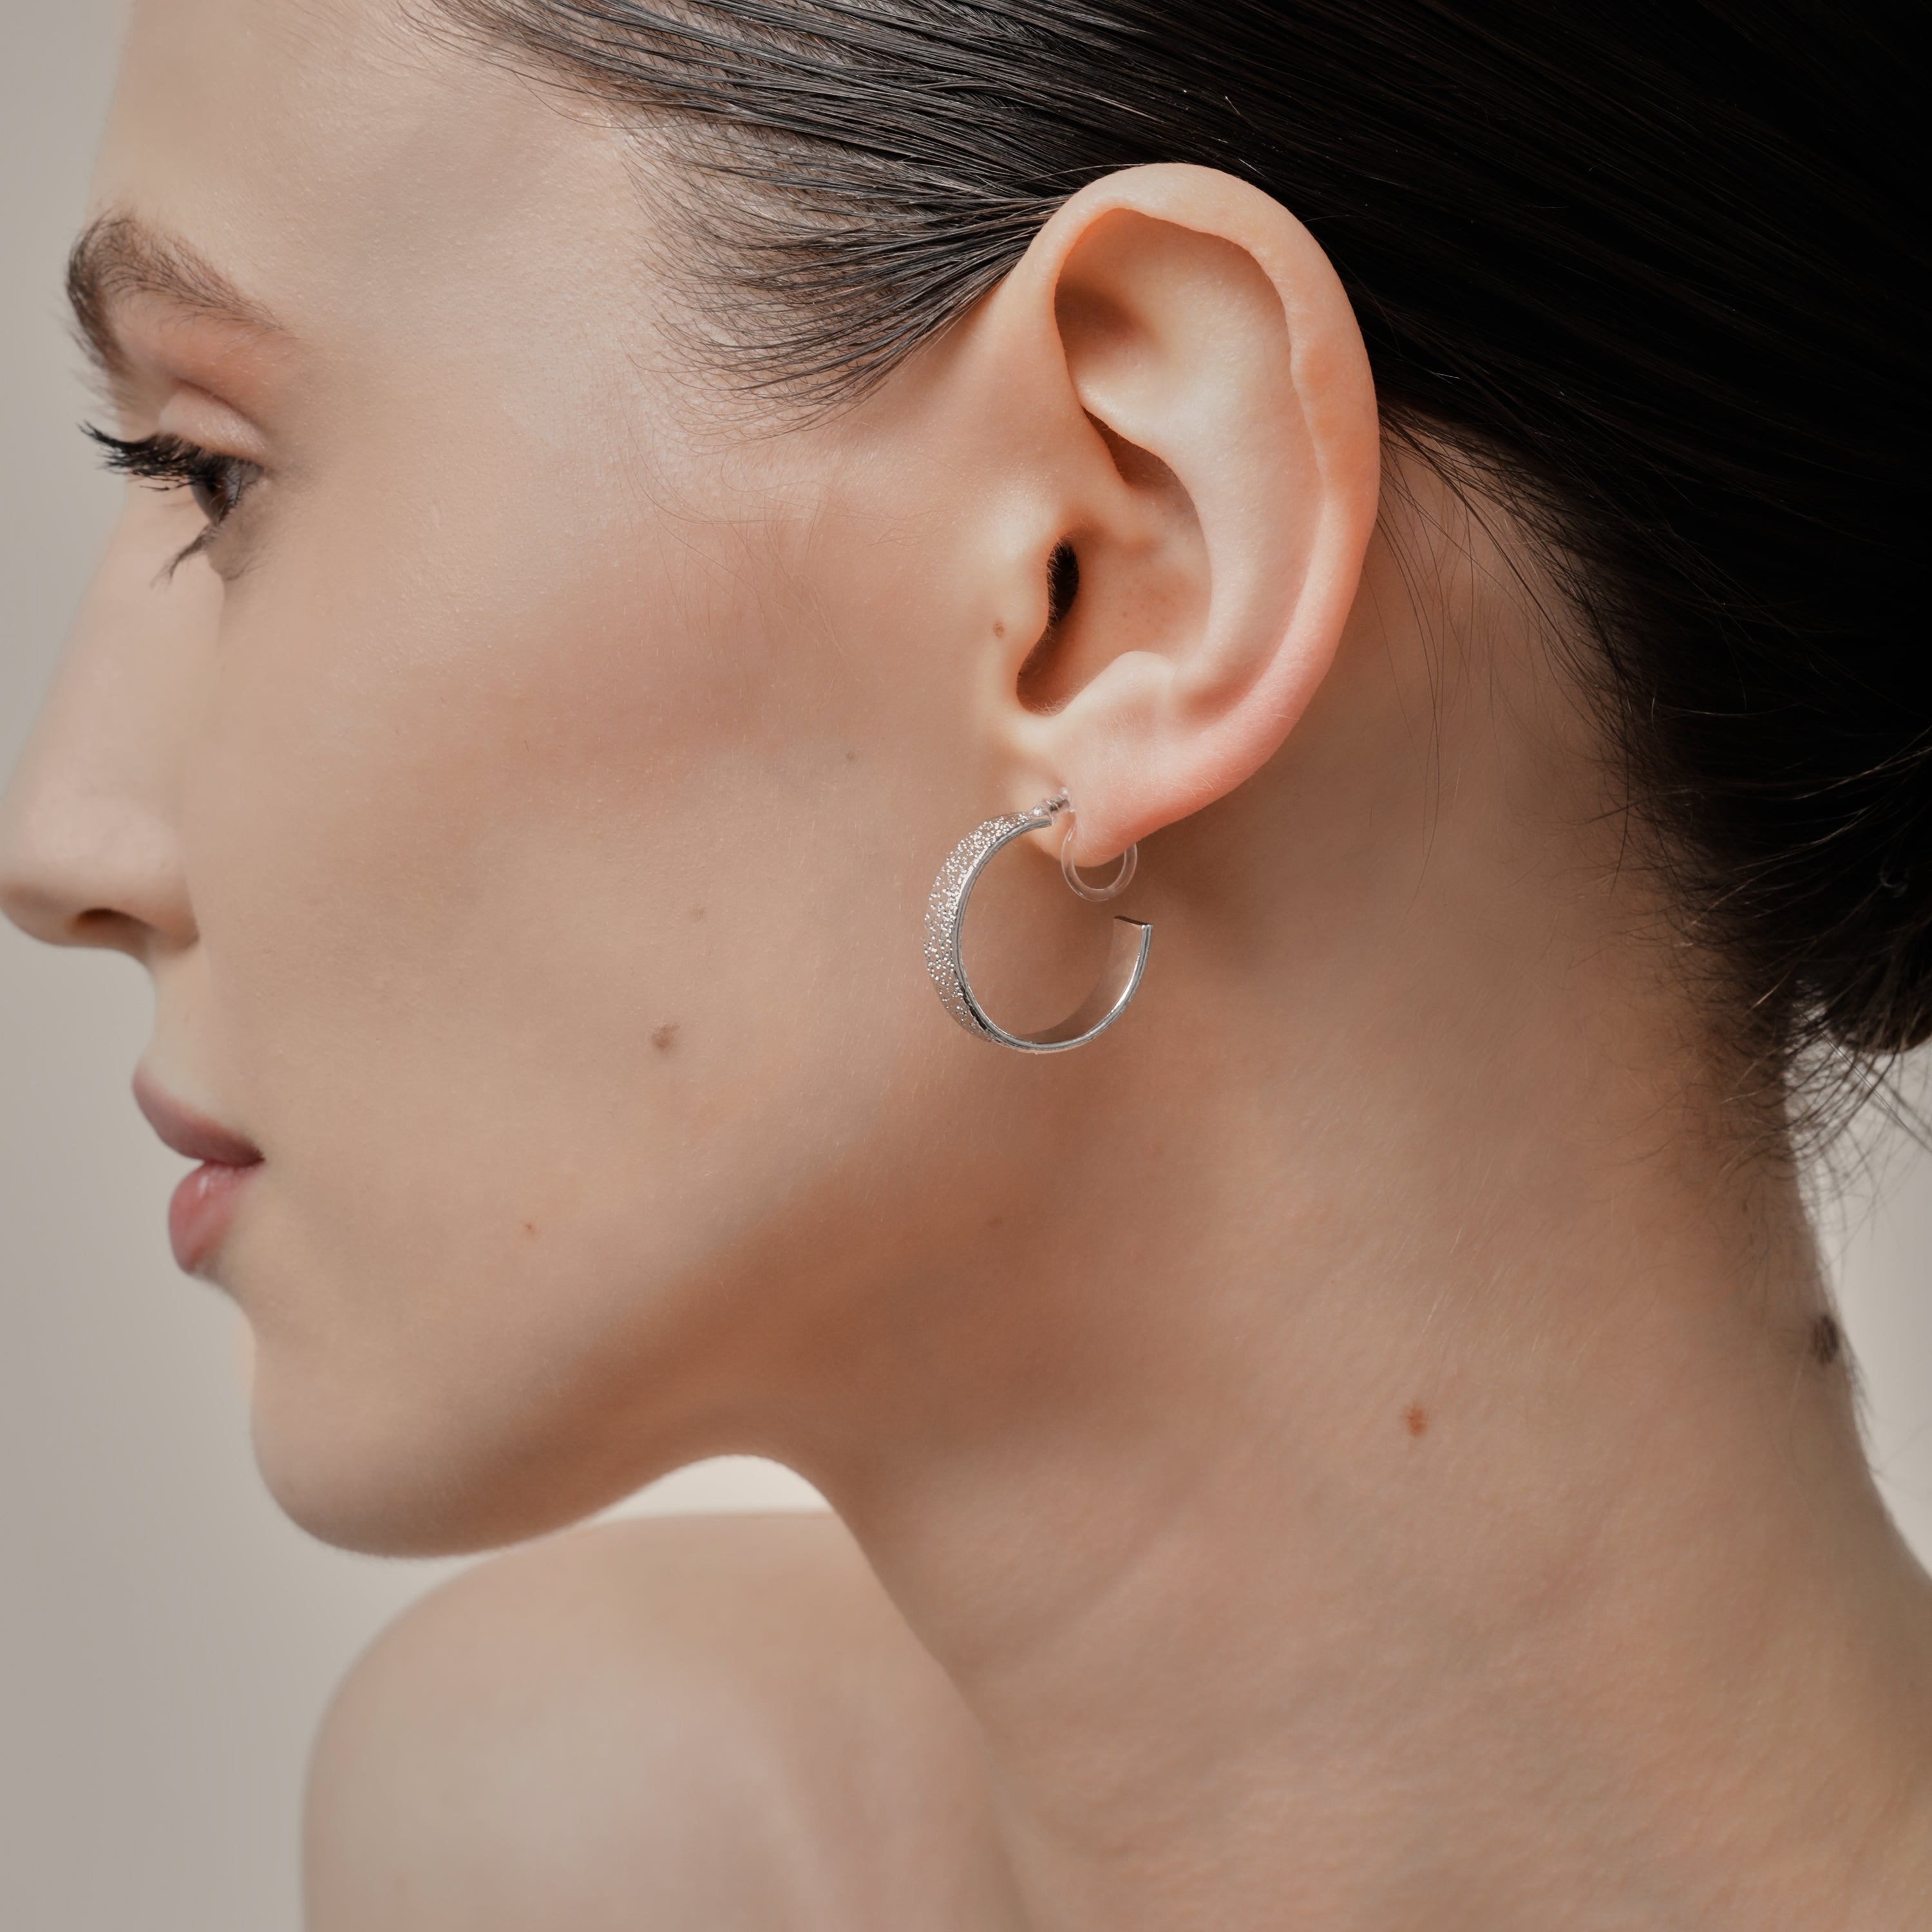 A model wearing the Speckled Hoop Clip On Earrings in Silver offer versatility and comfort for a range of ear sizes and sensitivities. With a medium secure hold, you can confidently wear them for 8-12 hours. Sold as a pair.